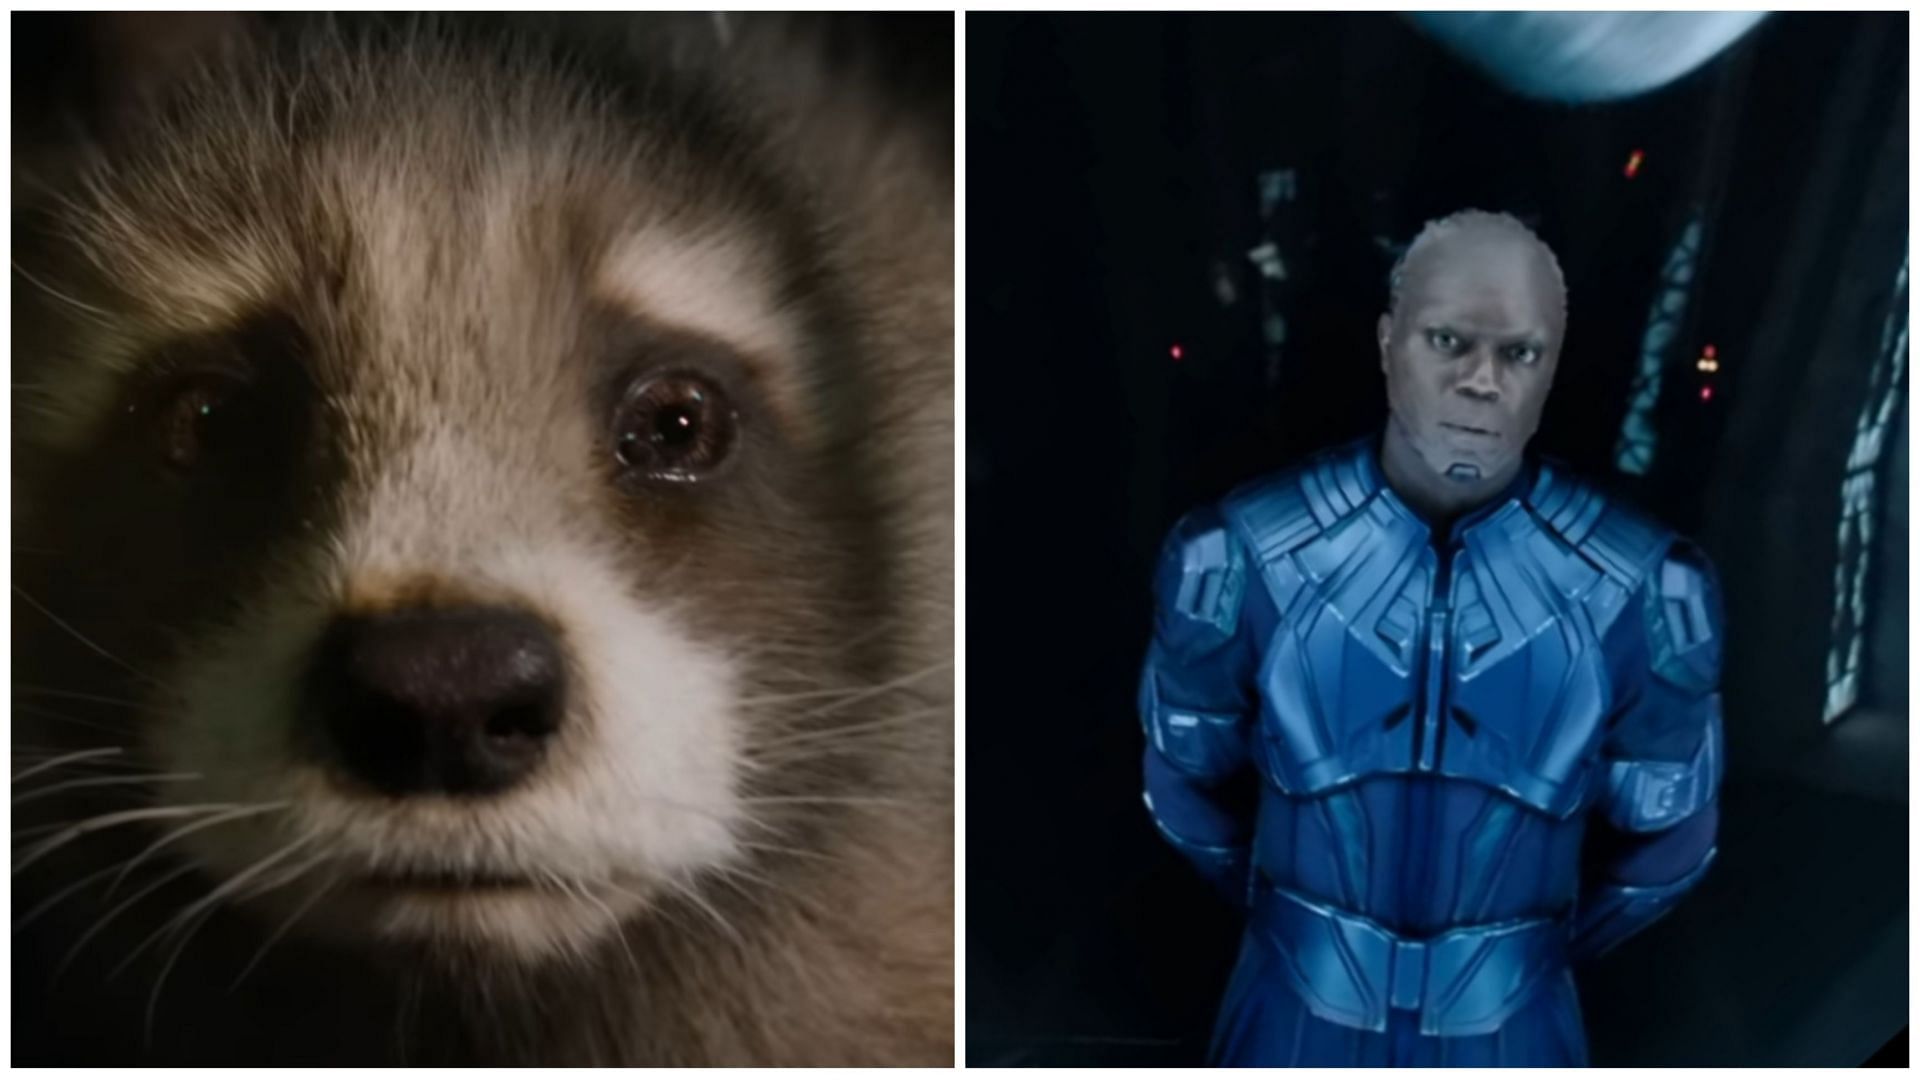 Rocket and the High Evolutionary in Guardians of the Galaxy Vol. 3 (Images via Marvel Studios)